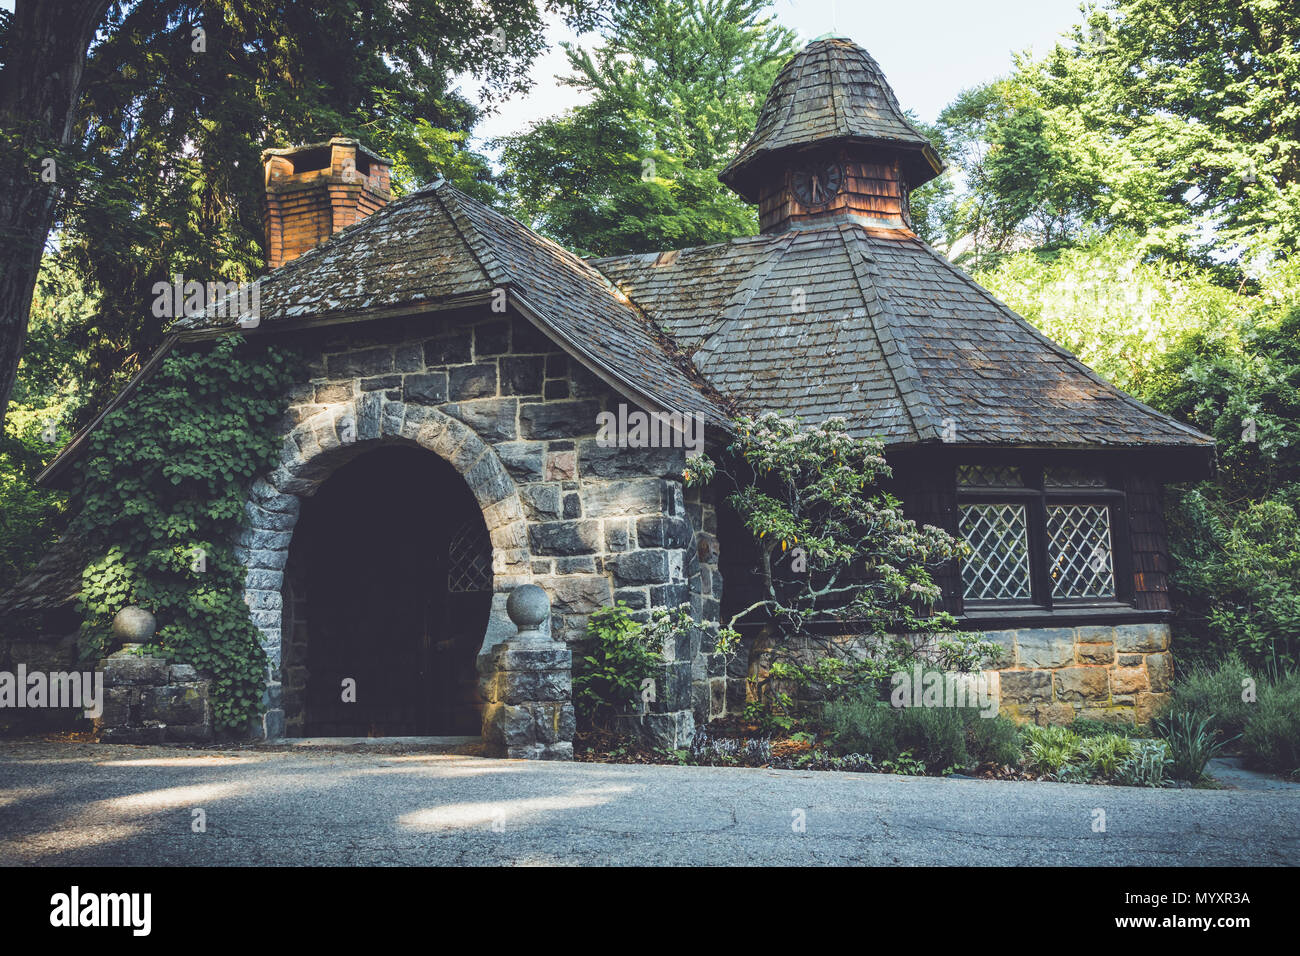 Old stone pumphouse in tudor revival architecture at Ringwood State Park, NJ in vintage setting Stock Photo